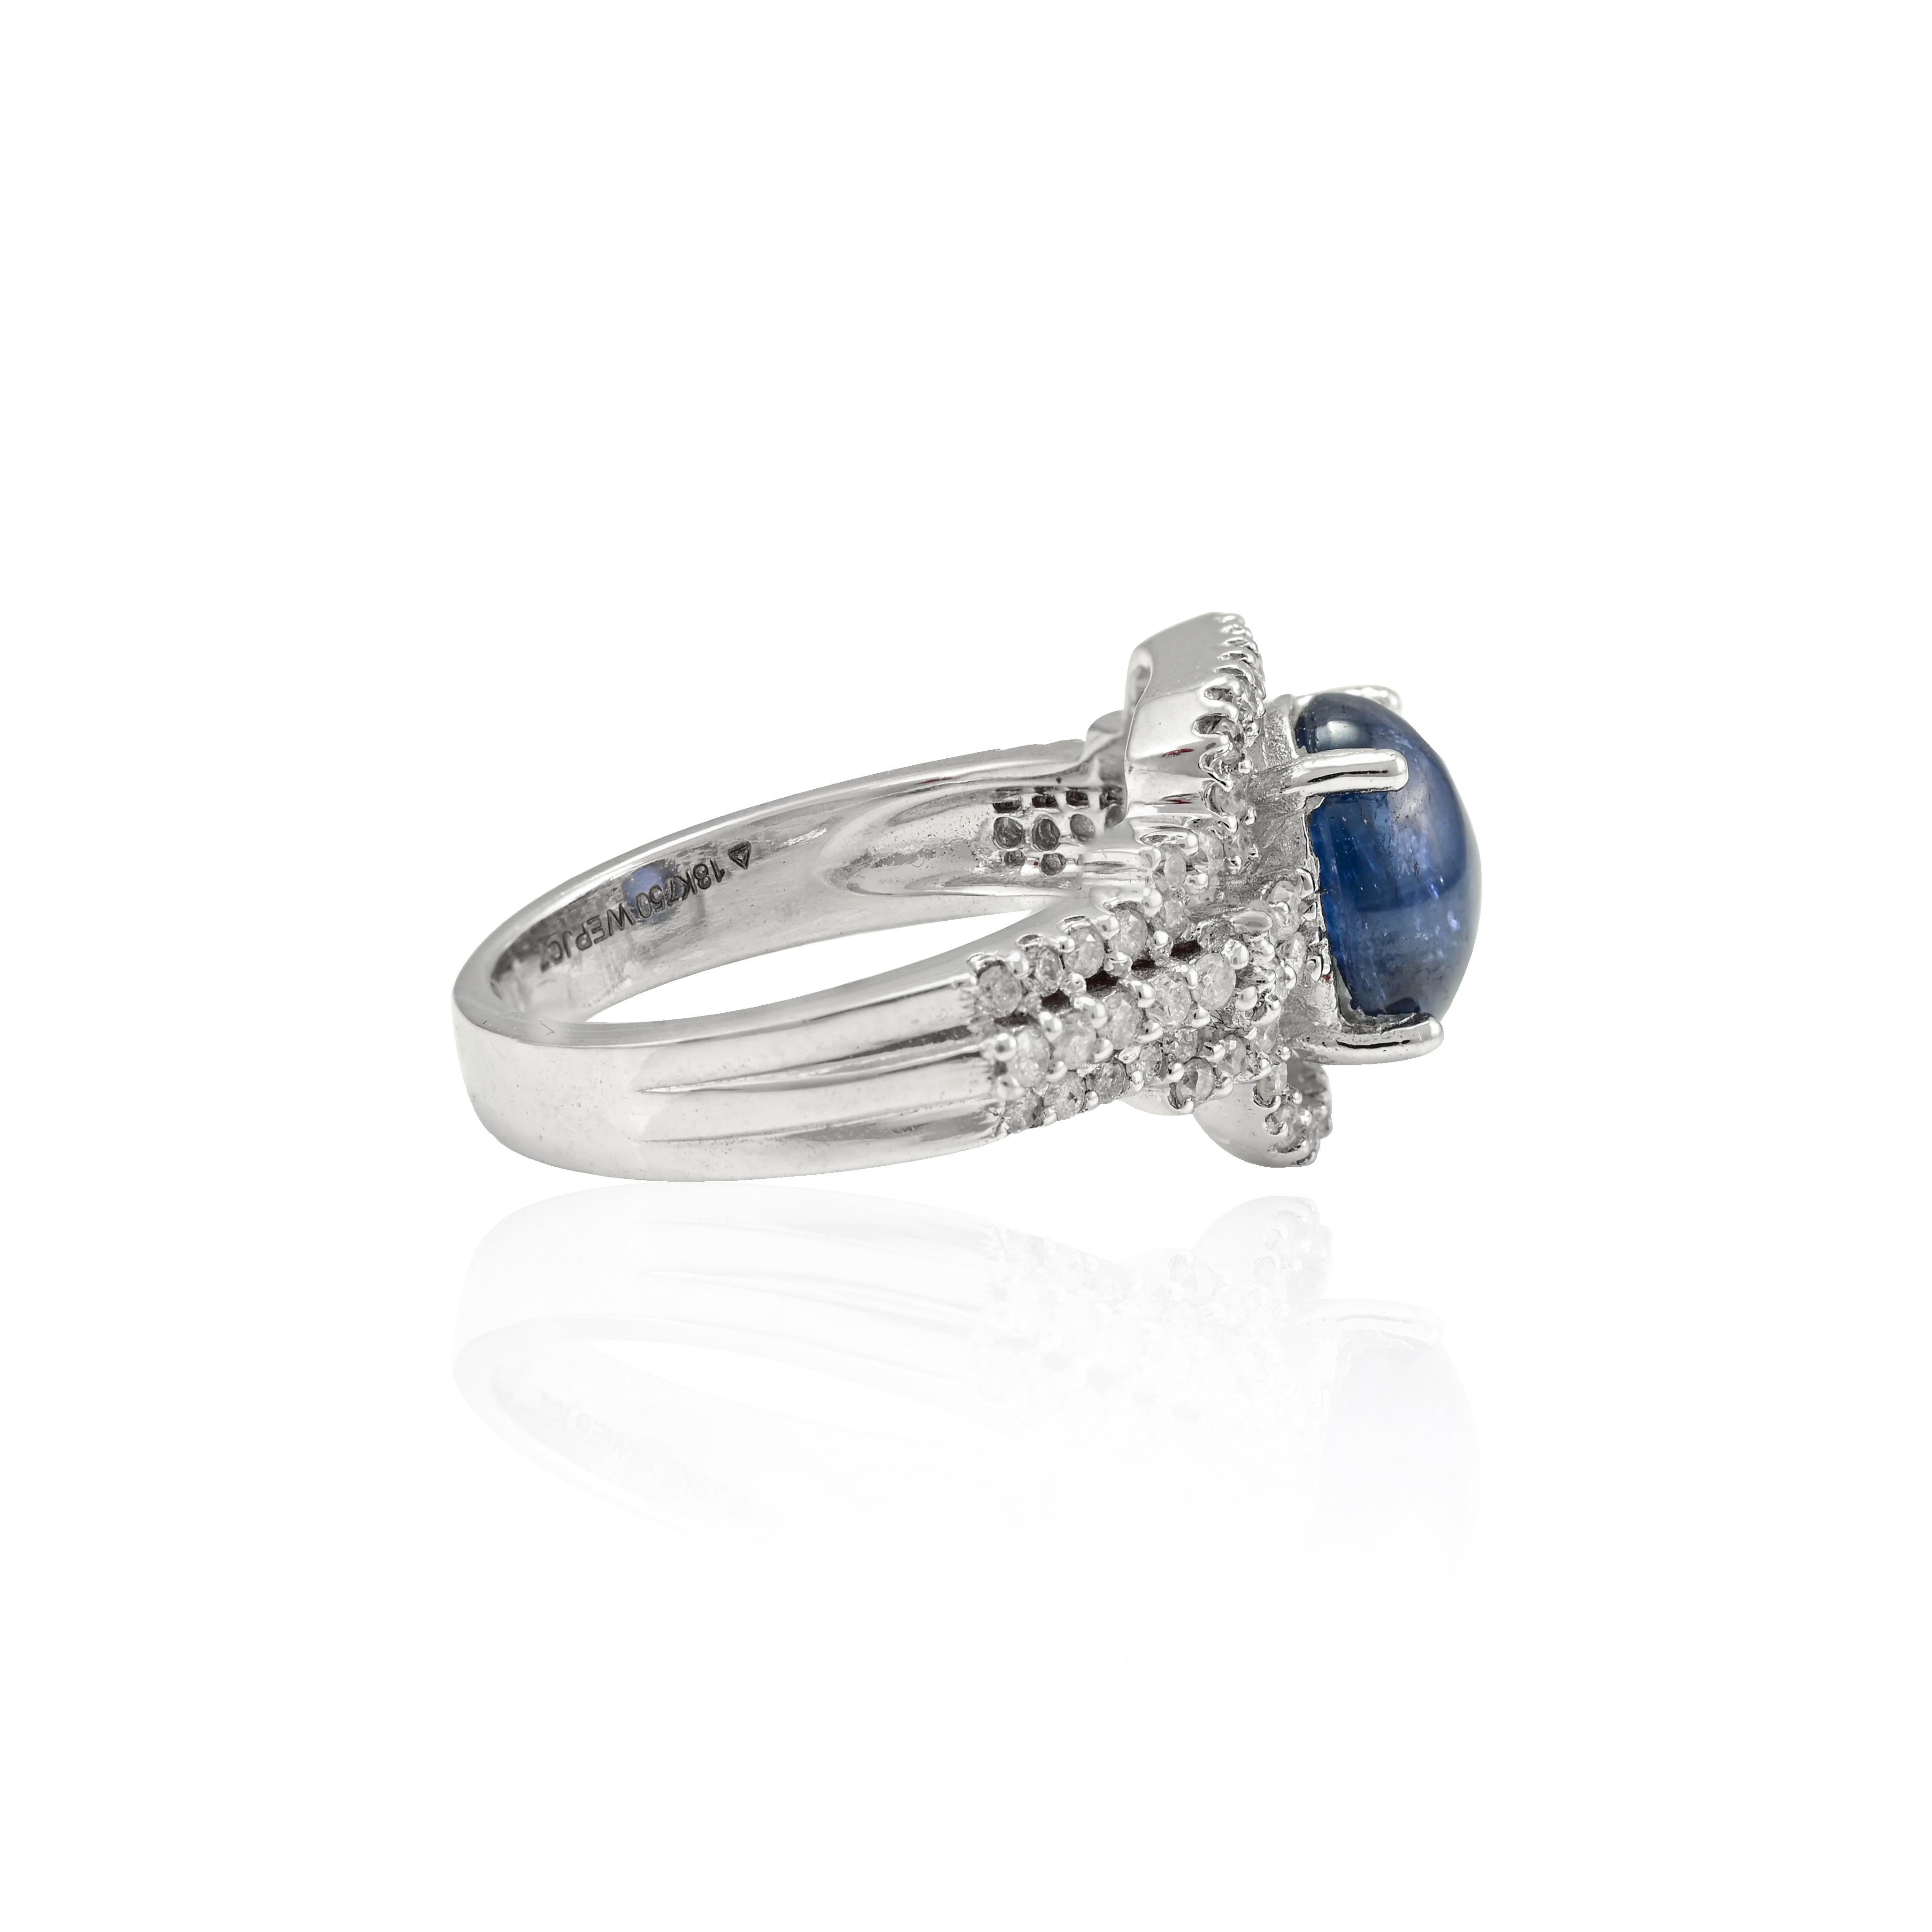 For Sale:  3.01 Ct Blue Sapphire and Diamond Engagement Ring Made 18k Solid White Gold 6